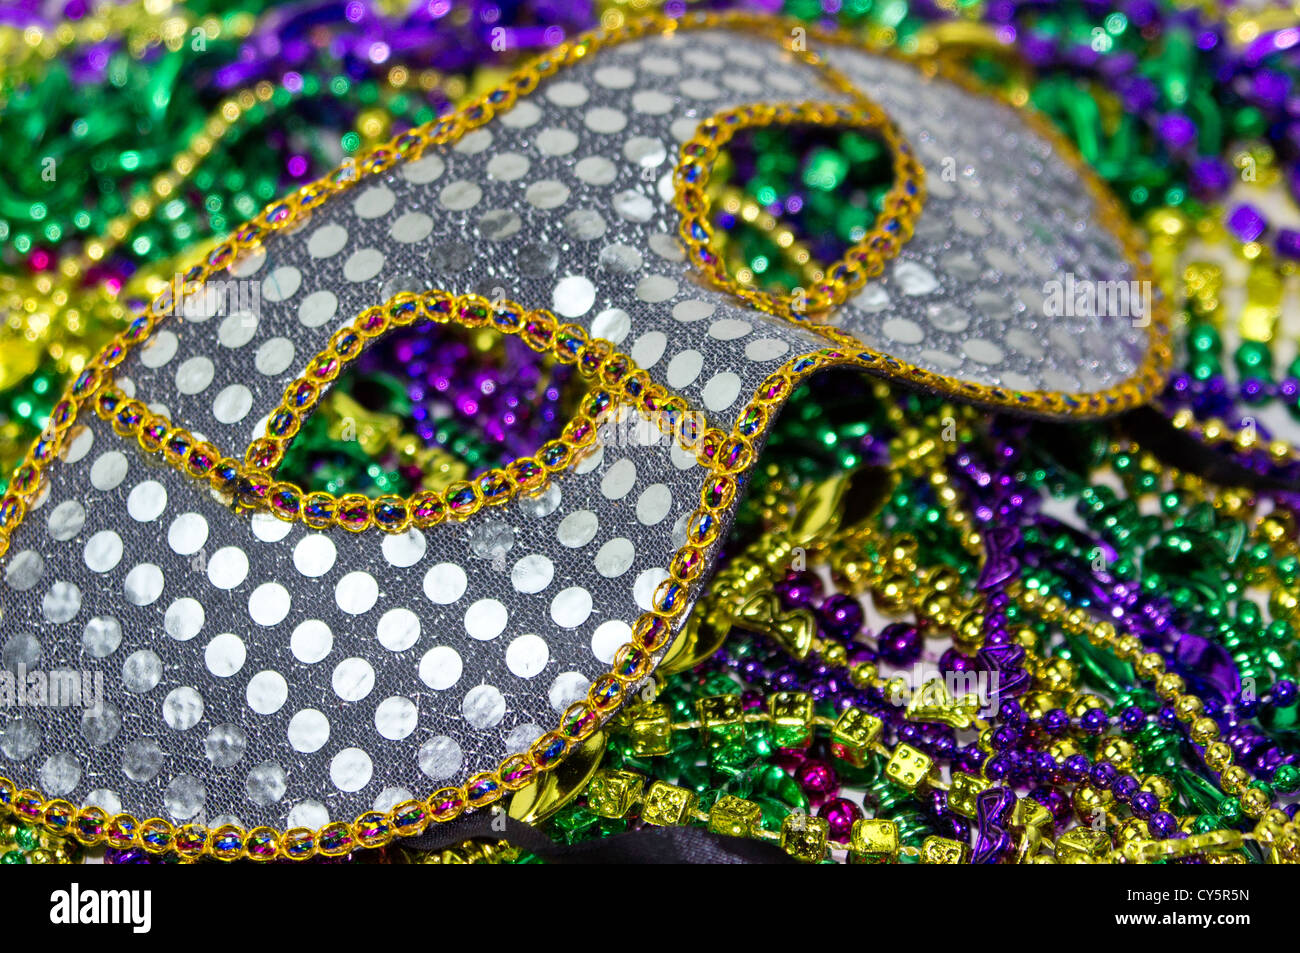 Mardi Gras masquerade mask on a background of colorful Mardi Gras Beads Stock Photo